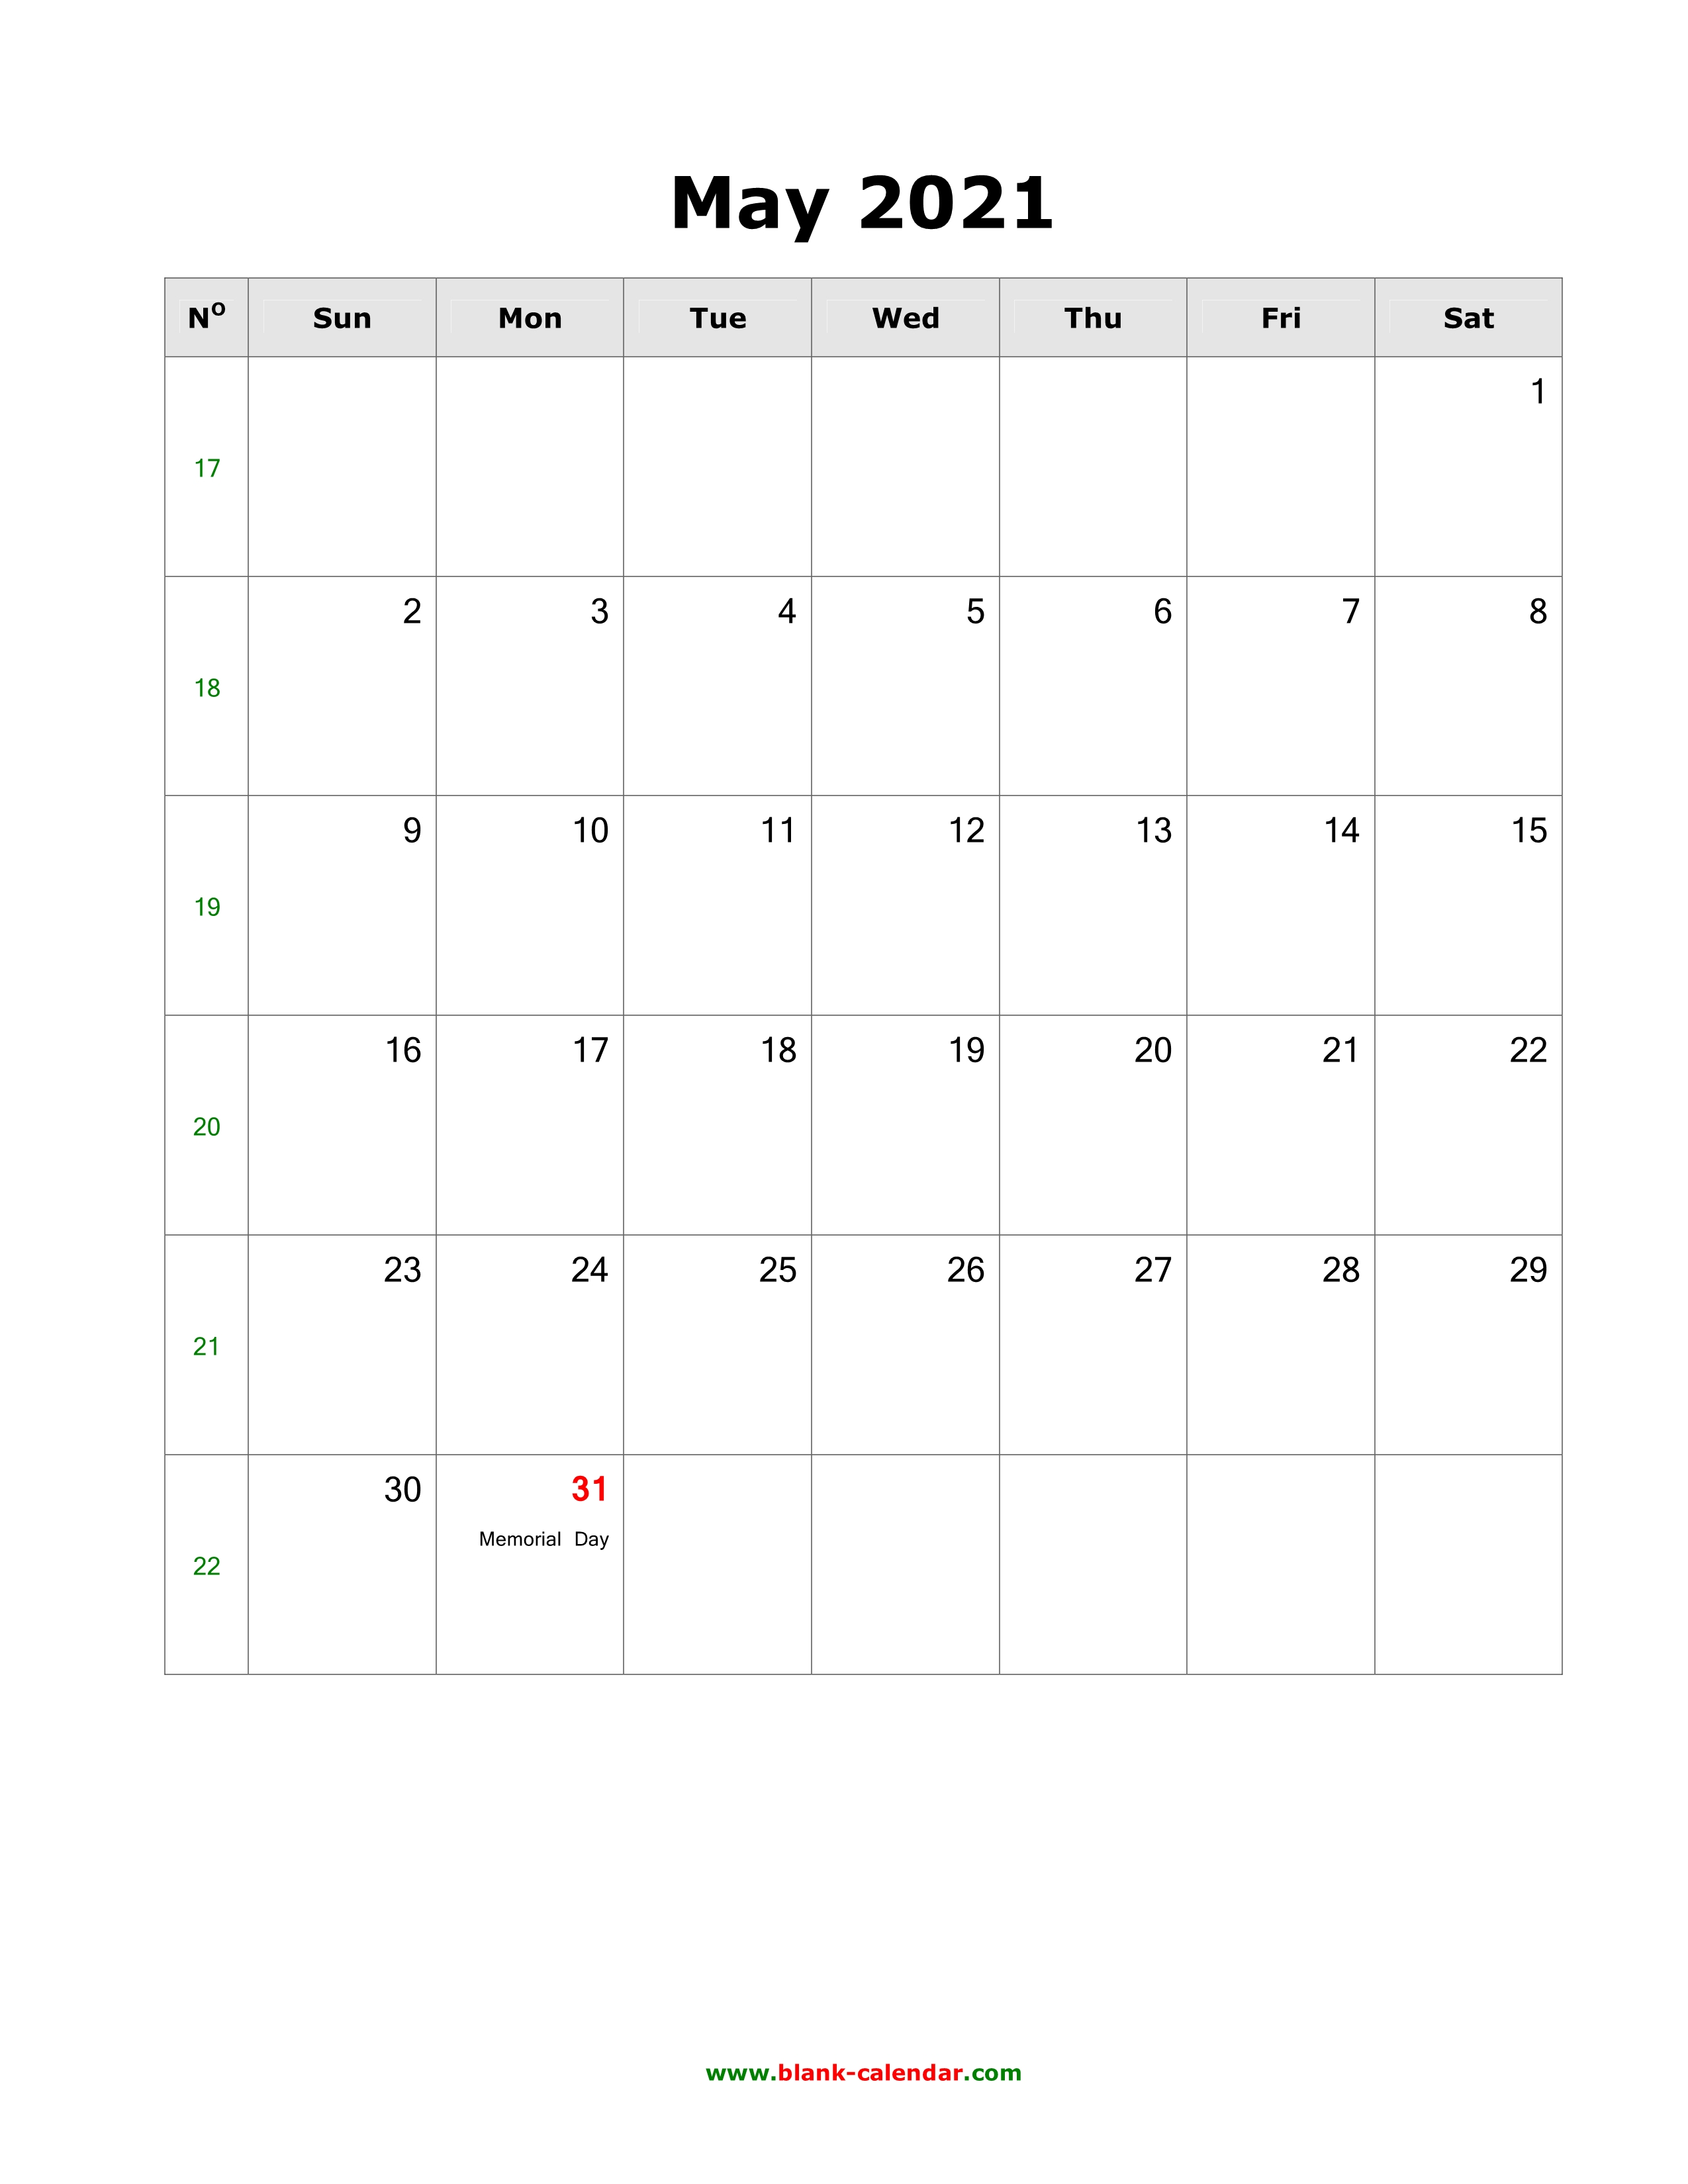 Download May 2021 Blank Calendar With Us Holidays Vertical